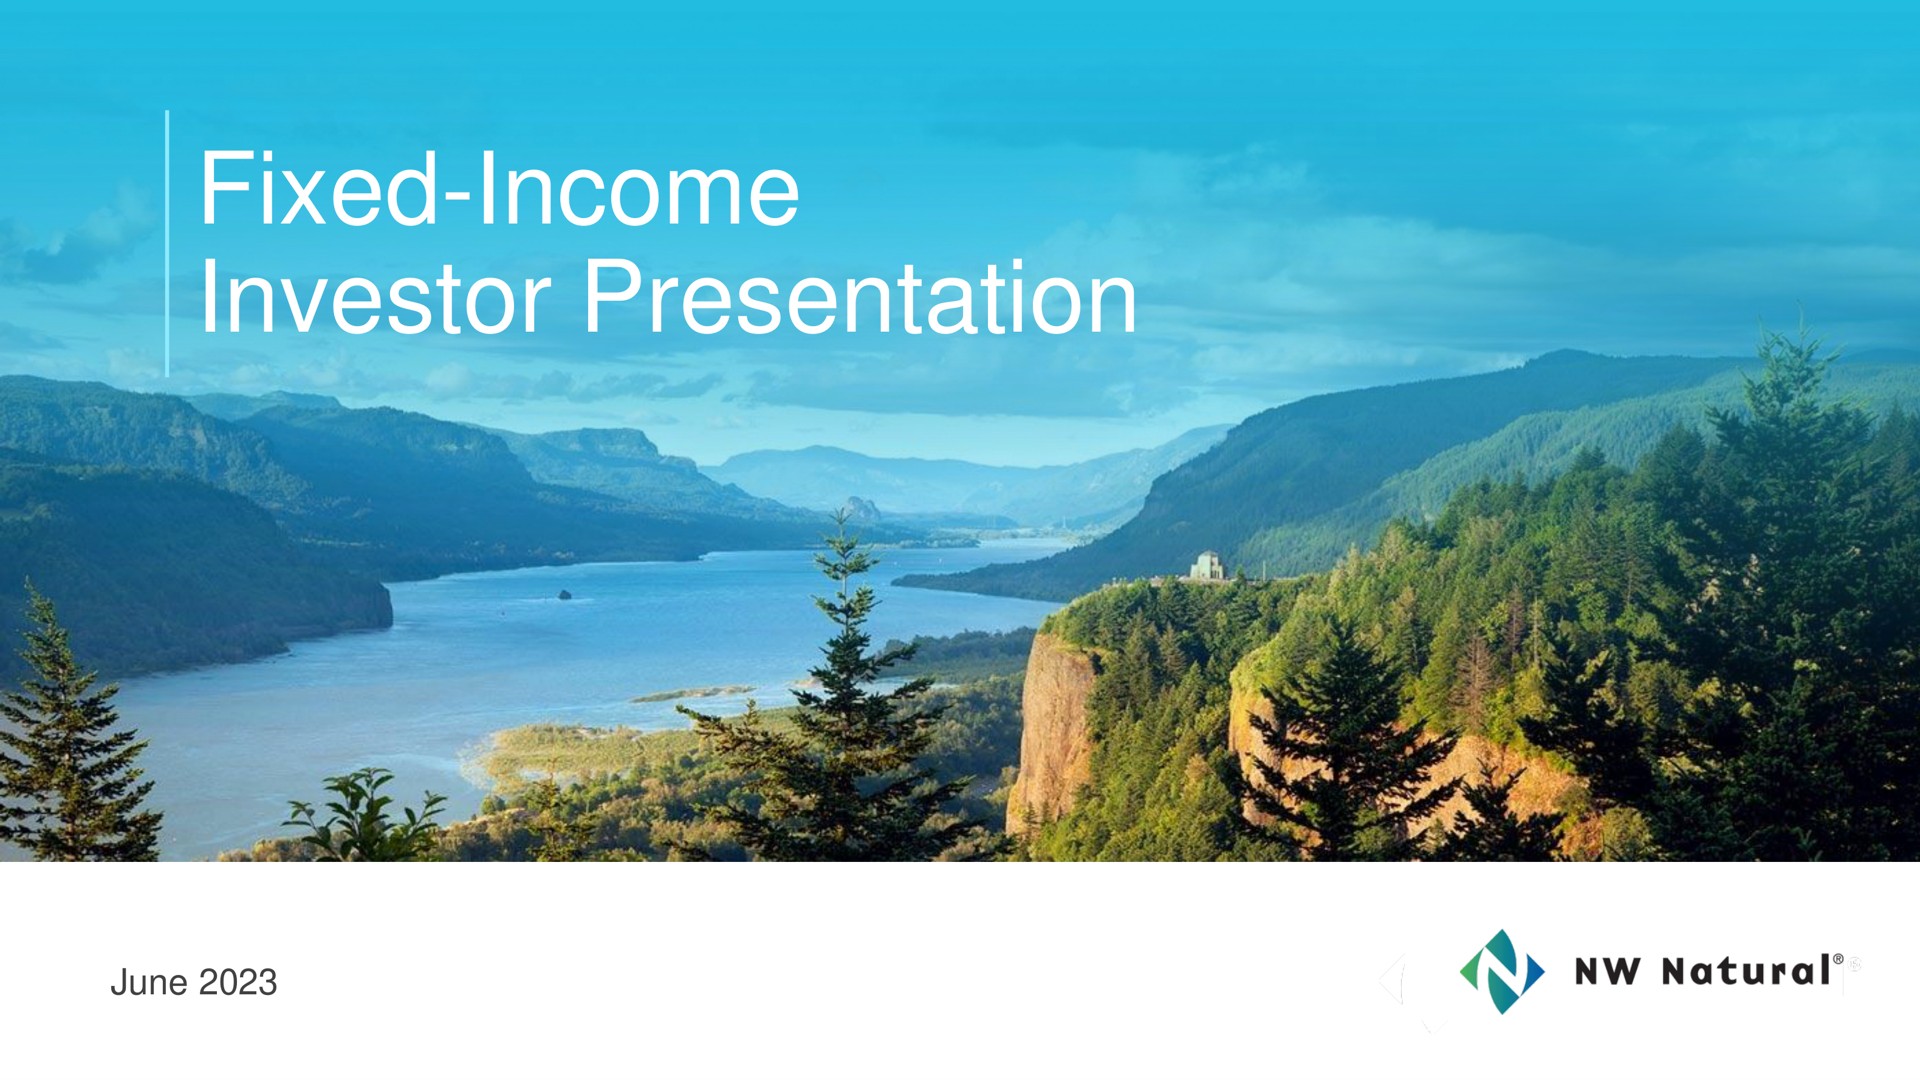 fixed income investor presentation | NW Natural Holdings